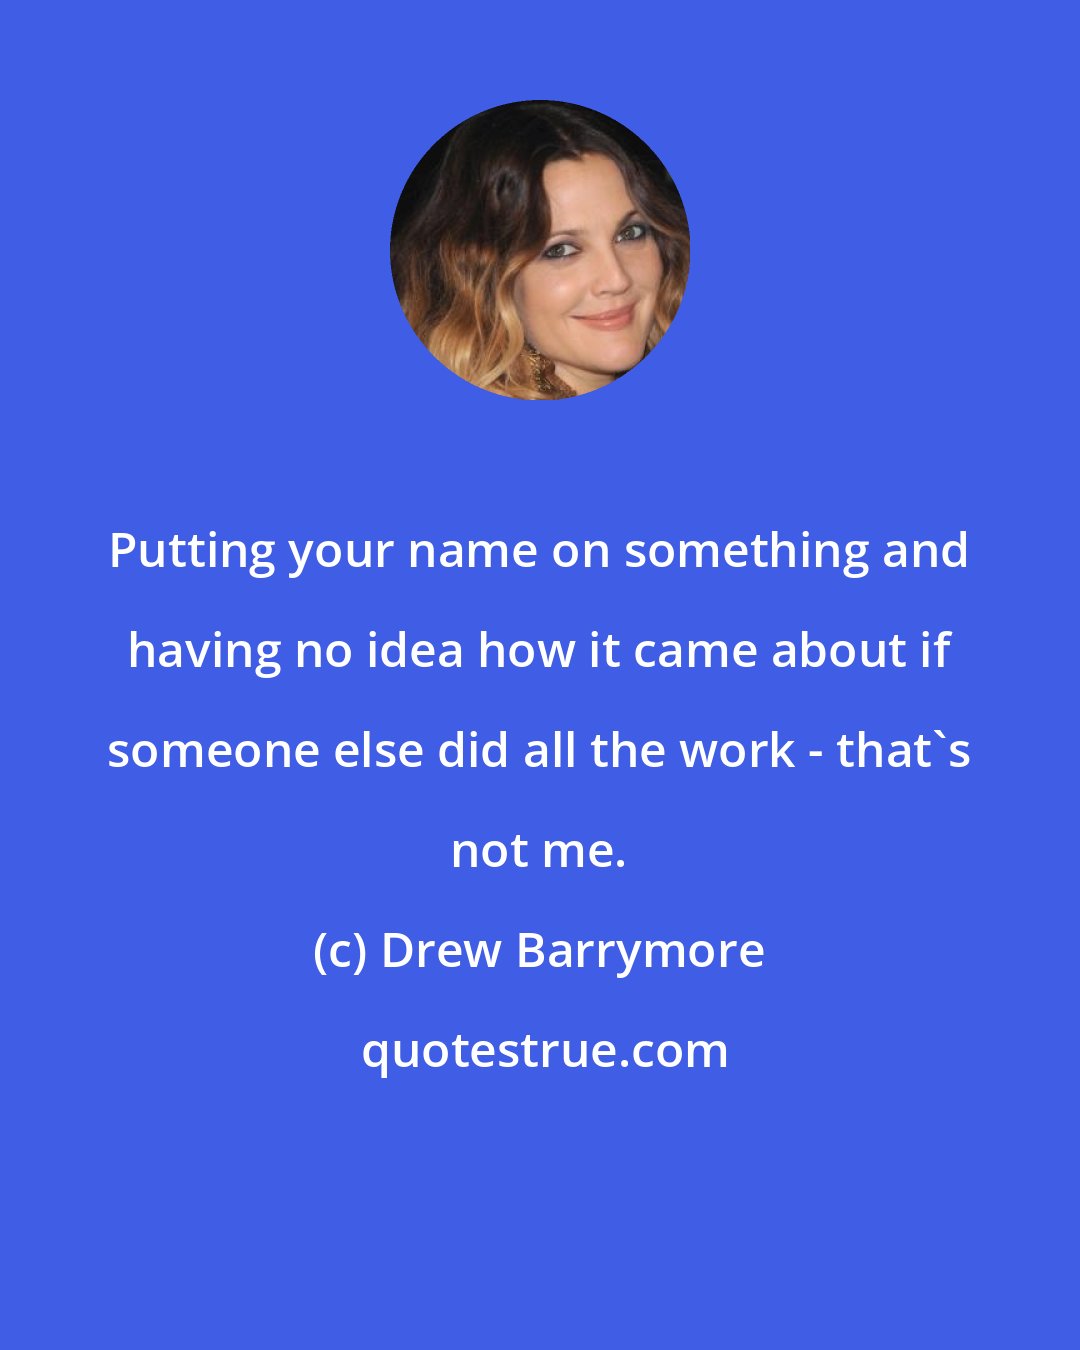 Drew Barrymore: Putting your name on something and having no idea how it came about if someone else did all the work - that's not me.